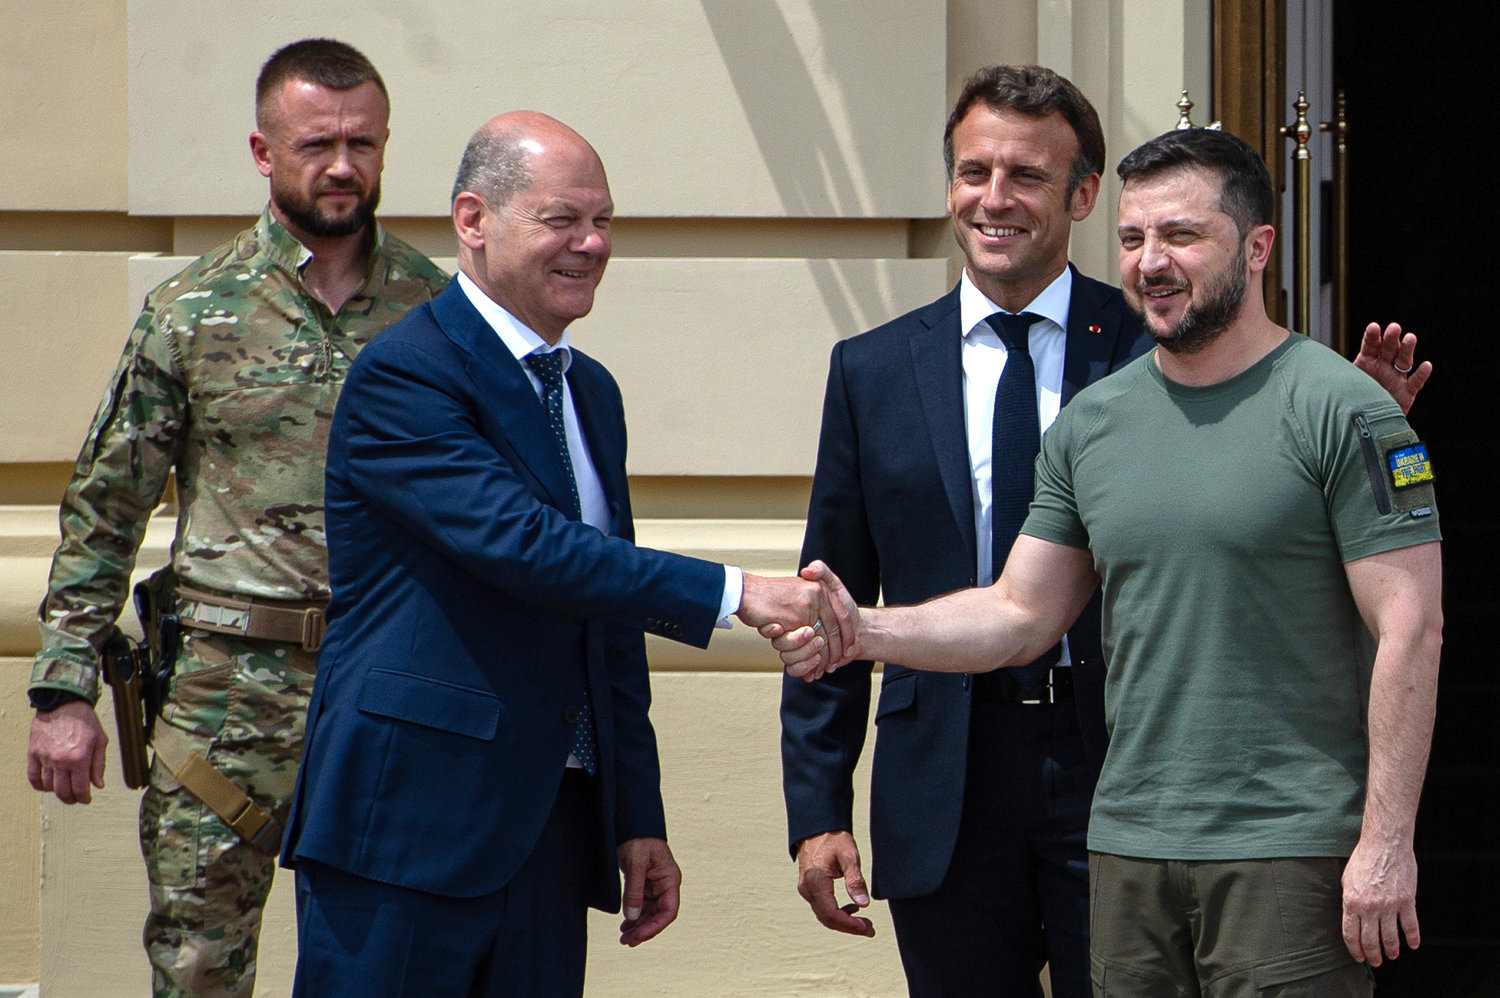 Ukrainian President Volodymyr Zelensky shakes hands with German Chancellor Olaf Scholz as France's President Emmanuel Macron taps him on the back on June 16, 2022 in Kyiv, Ukraine. (Alexey Furman/Getty Images/TNS)